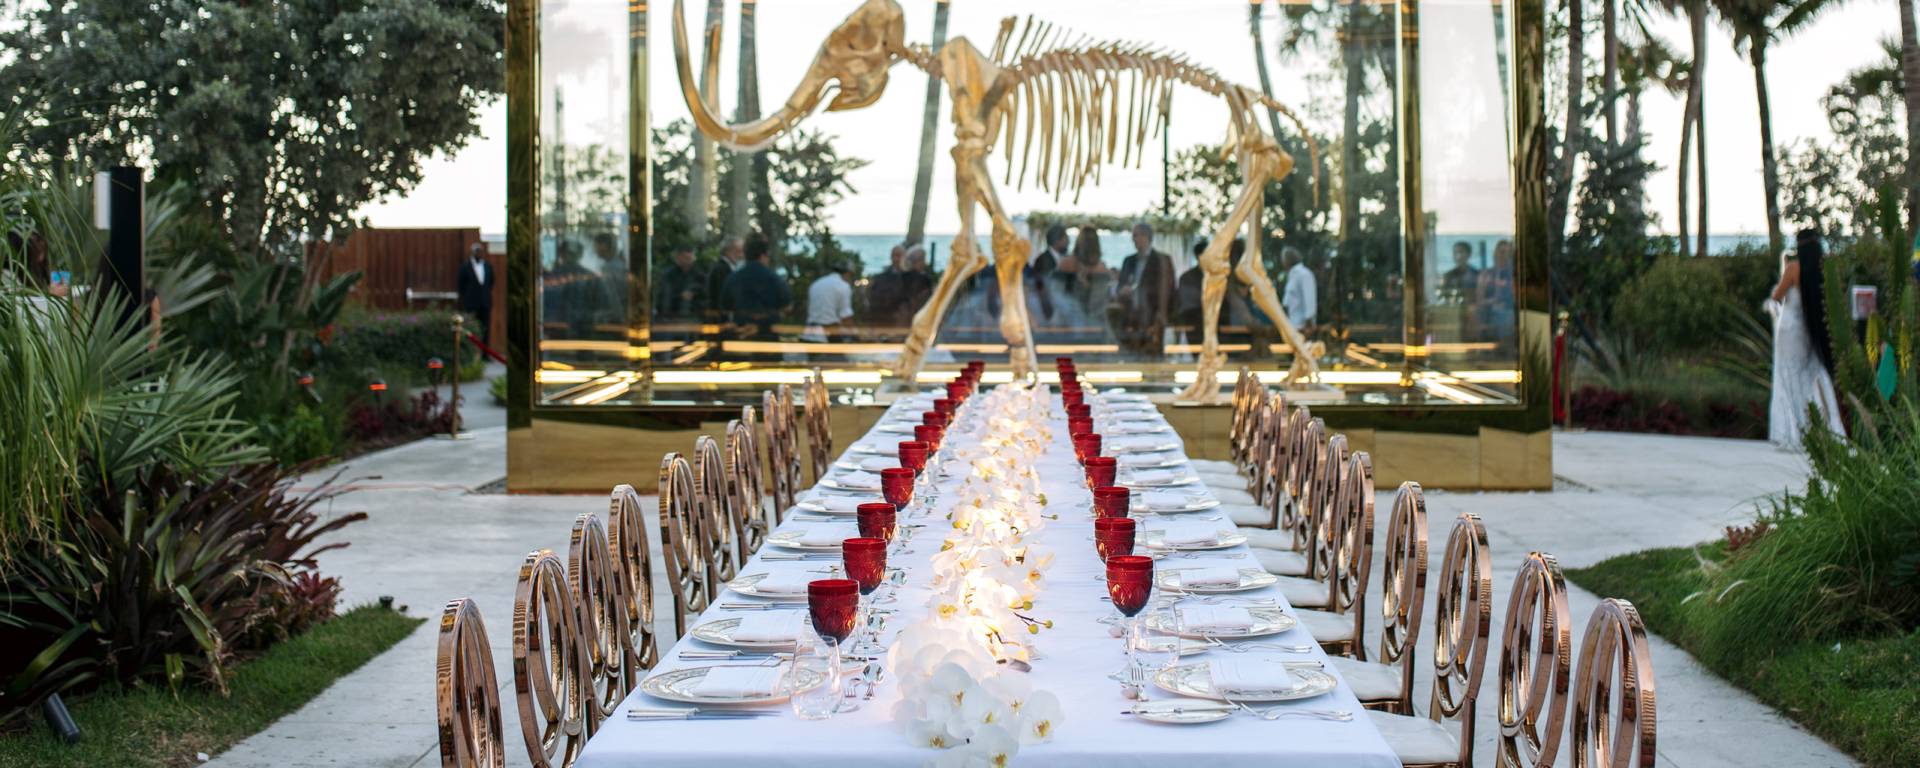 long dining table set outside for wedding reception